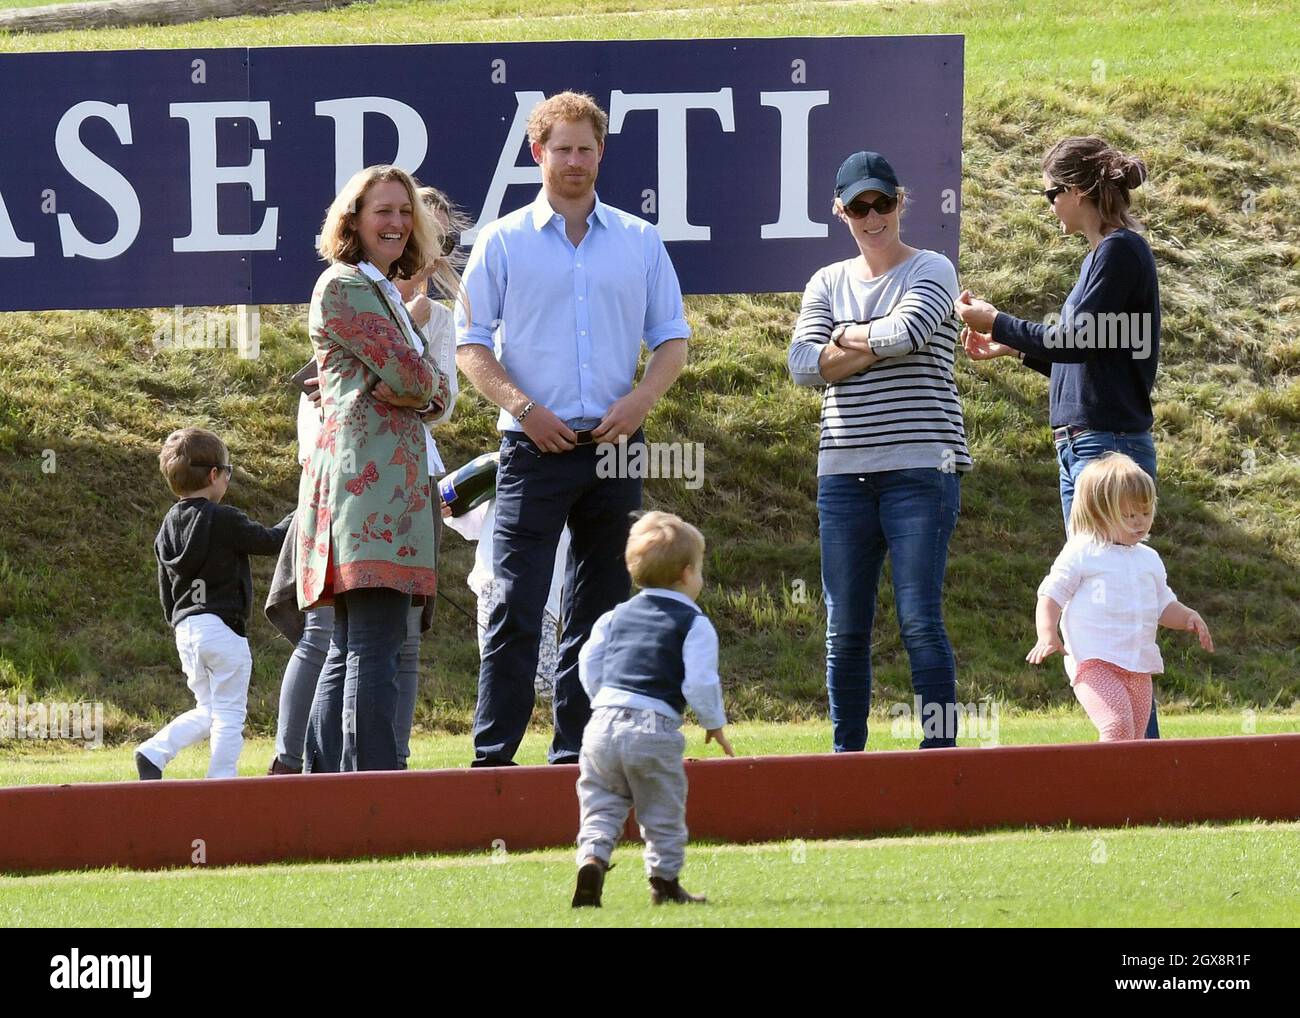 Prince Harry chats with Zara Tindall while Mia Tindall plays during the Maserati Charity Polo match at the Gloucestershire Festival of Polo at the Beaufort Polo Club on June 18, 2016. Stock Photo